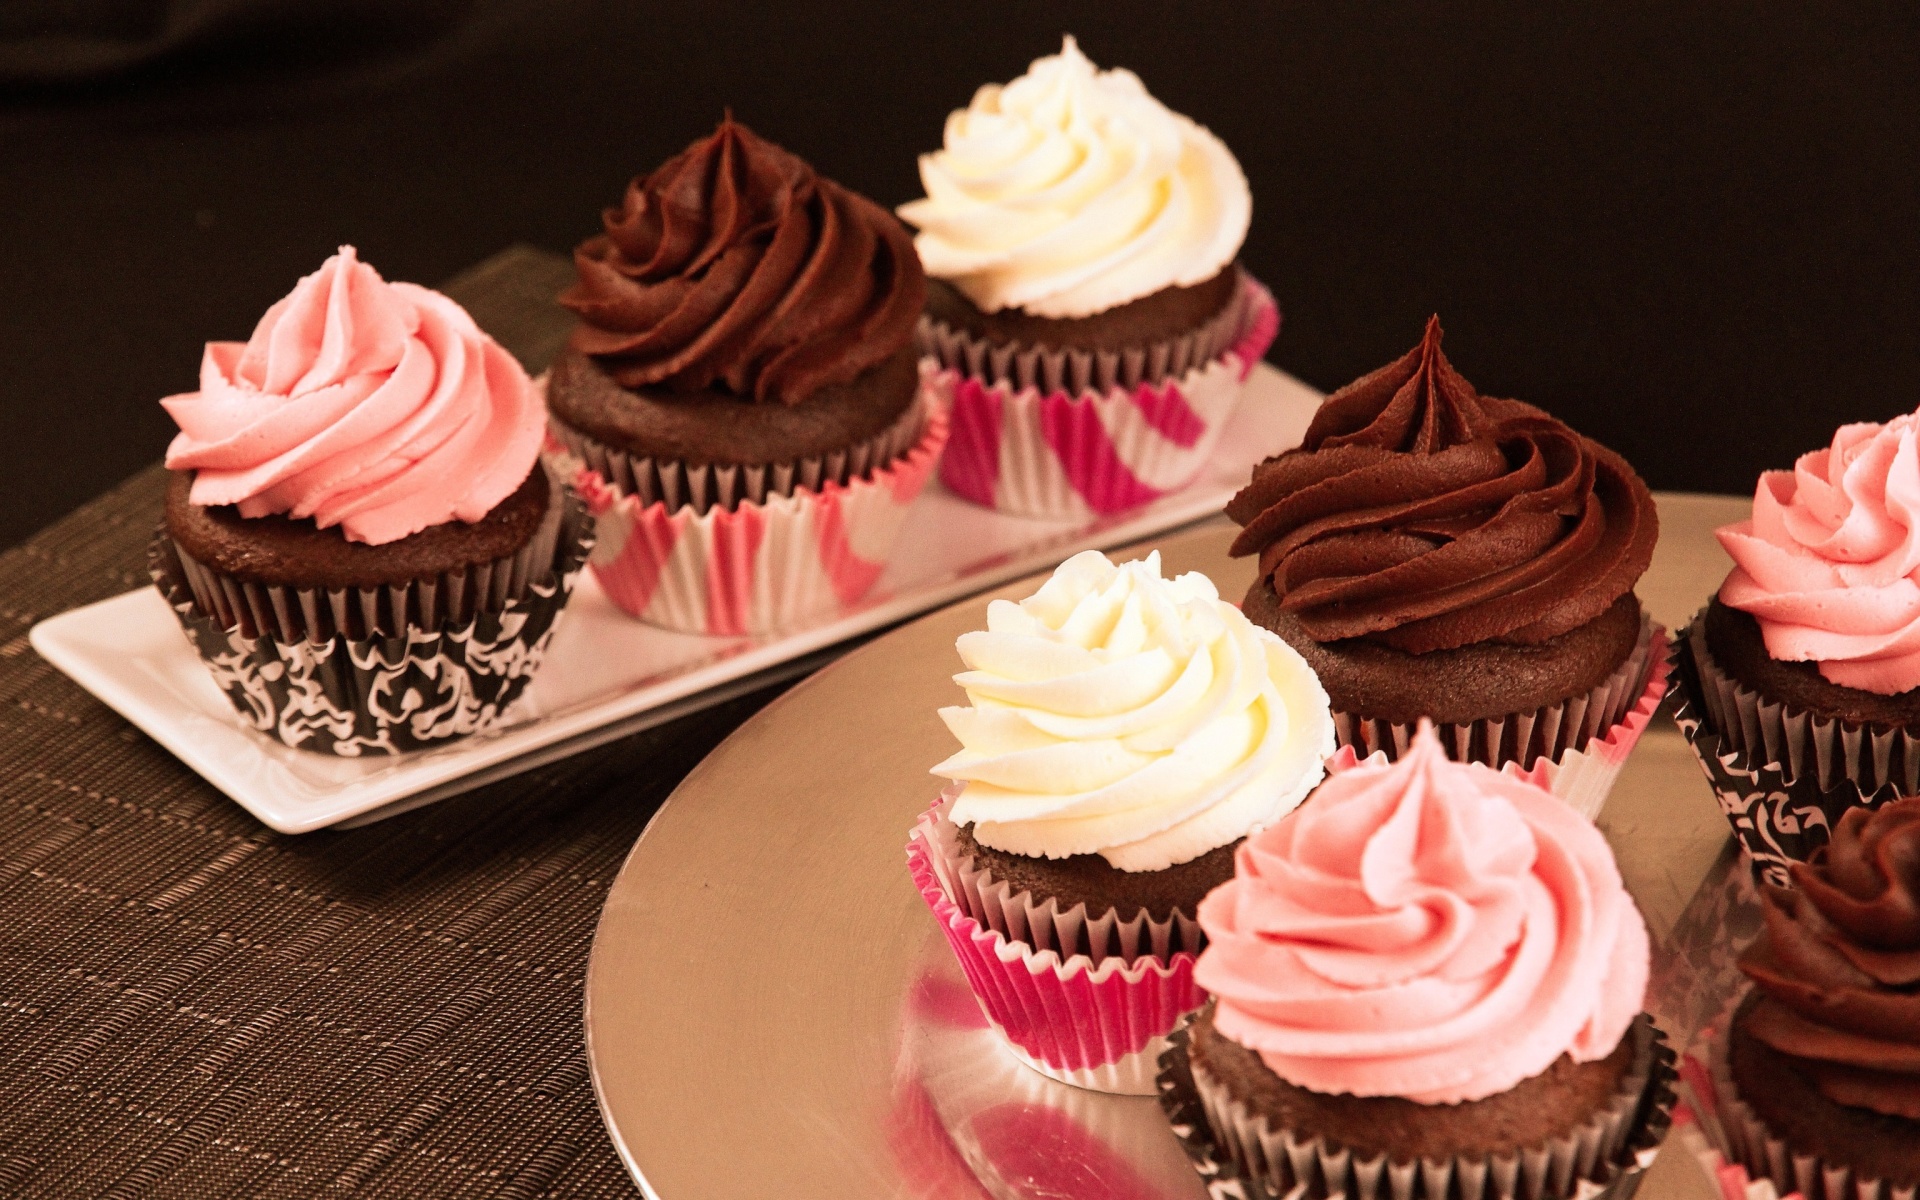 Cupcakes with Creme wallpaper 1920x1200